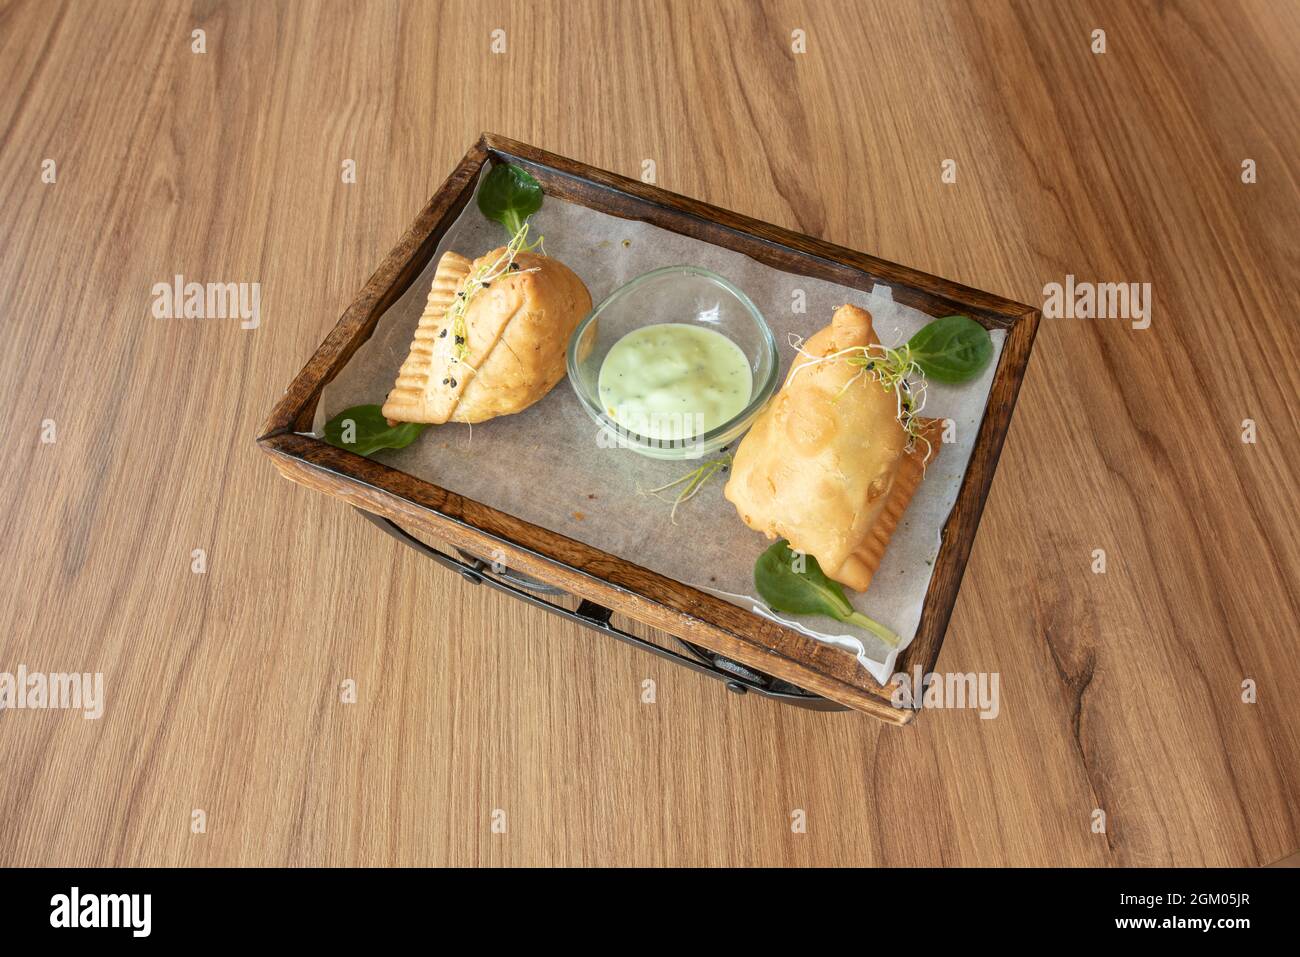 Fried samosas stuffed with vegetables with bean sprouts on top and Indian green sauce for dipping Stock Photo